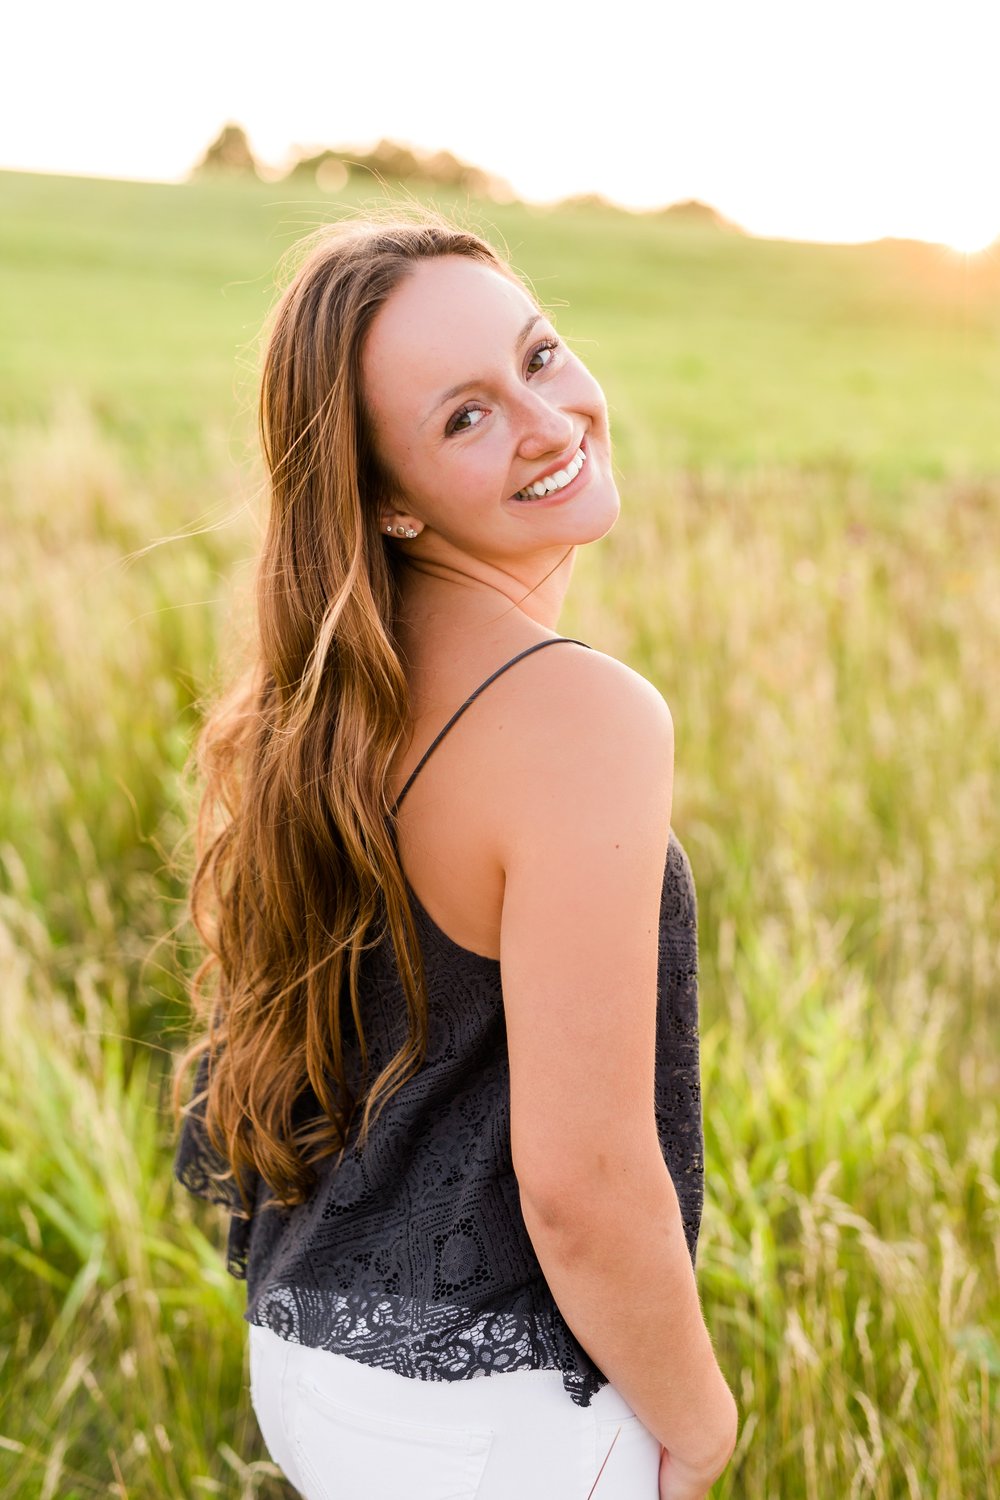 Rural Minnesota High School Senior Session with Hay Bales and by the Lake near Audubon, MN | Livi